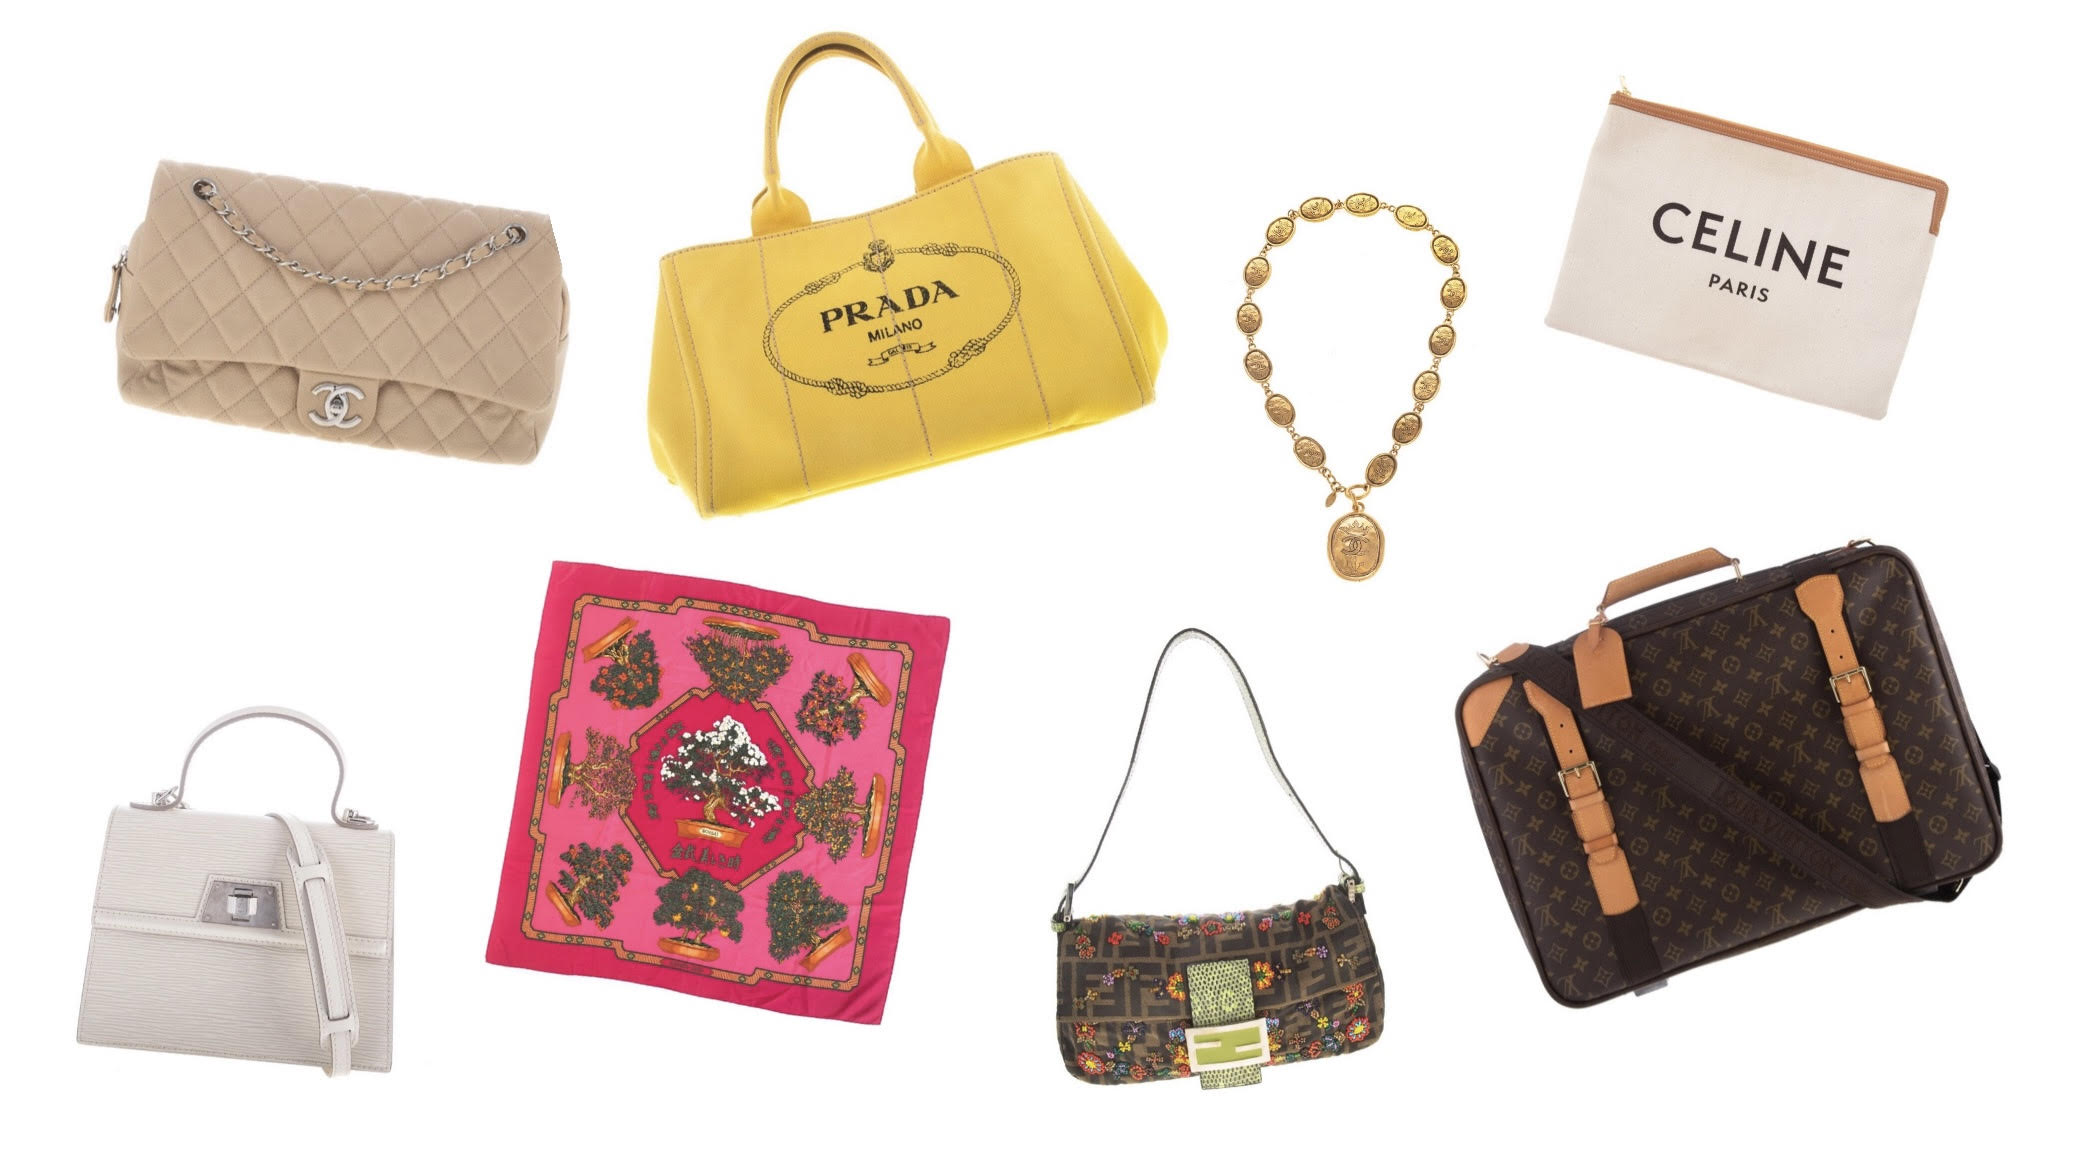 26 rare vintage handbags from Louis Vuitton, Chanel and Hermes we